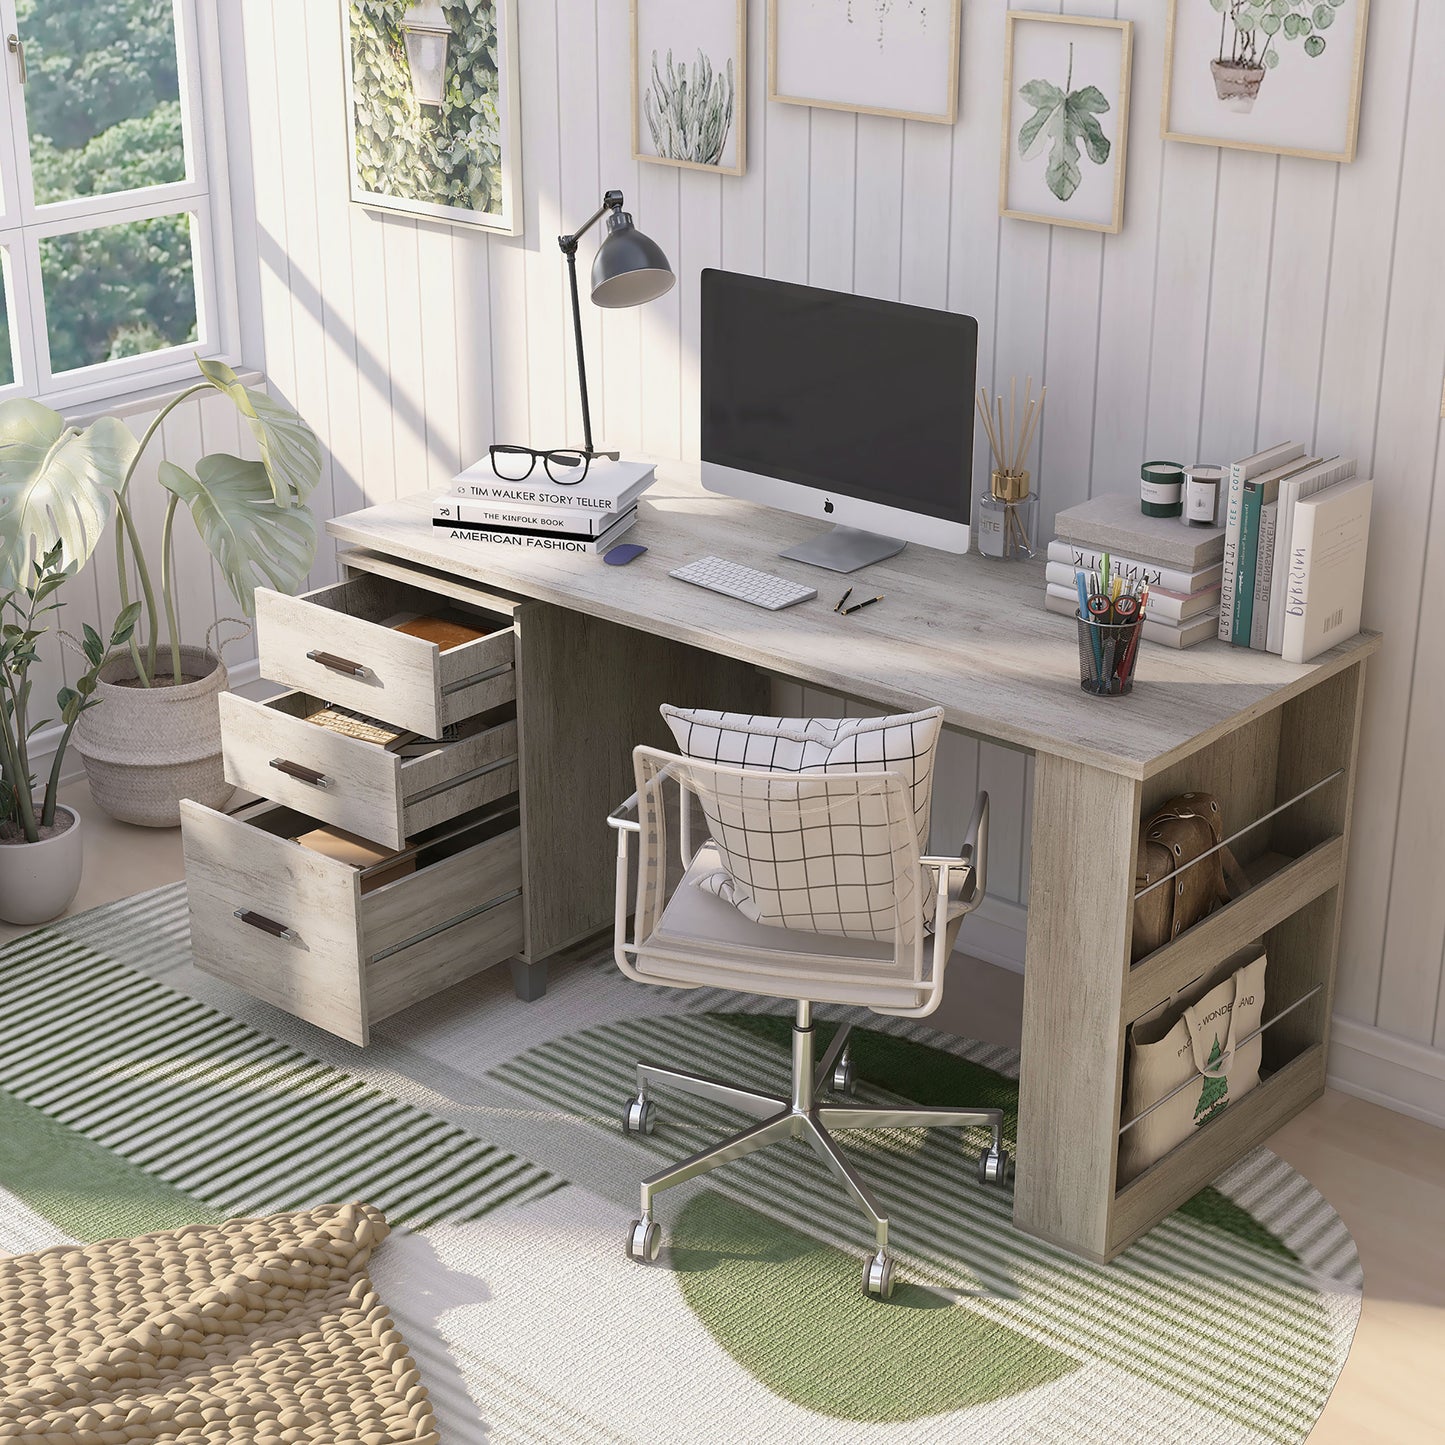 Left angled bird's eye view of a transitional coastal white three-drawer office desk with magazine racks and drawers open in a home office with accessories